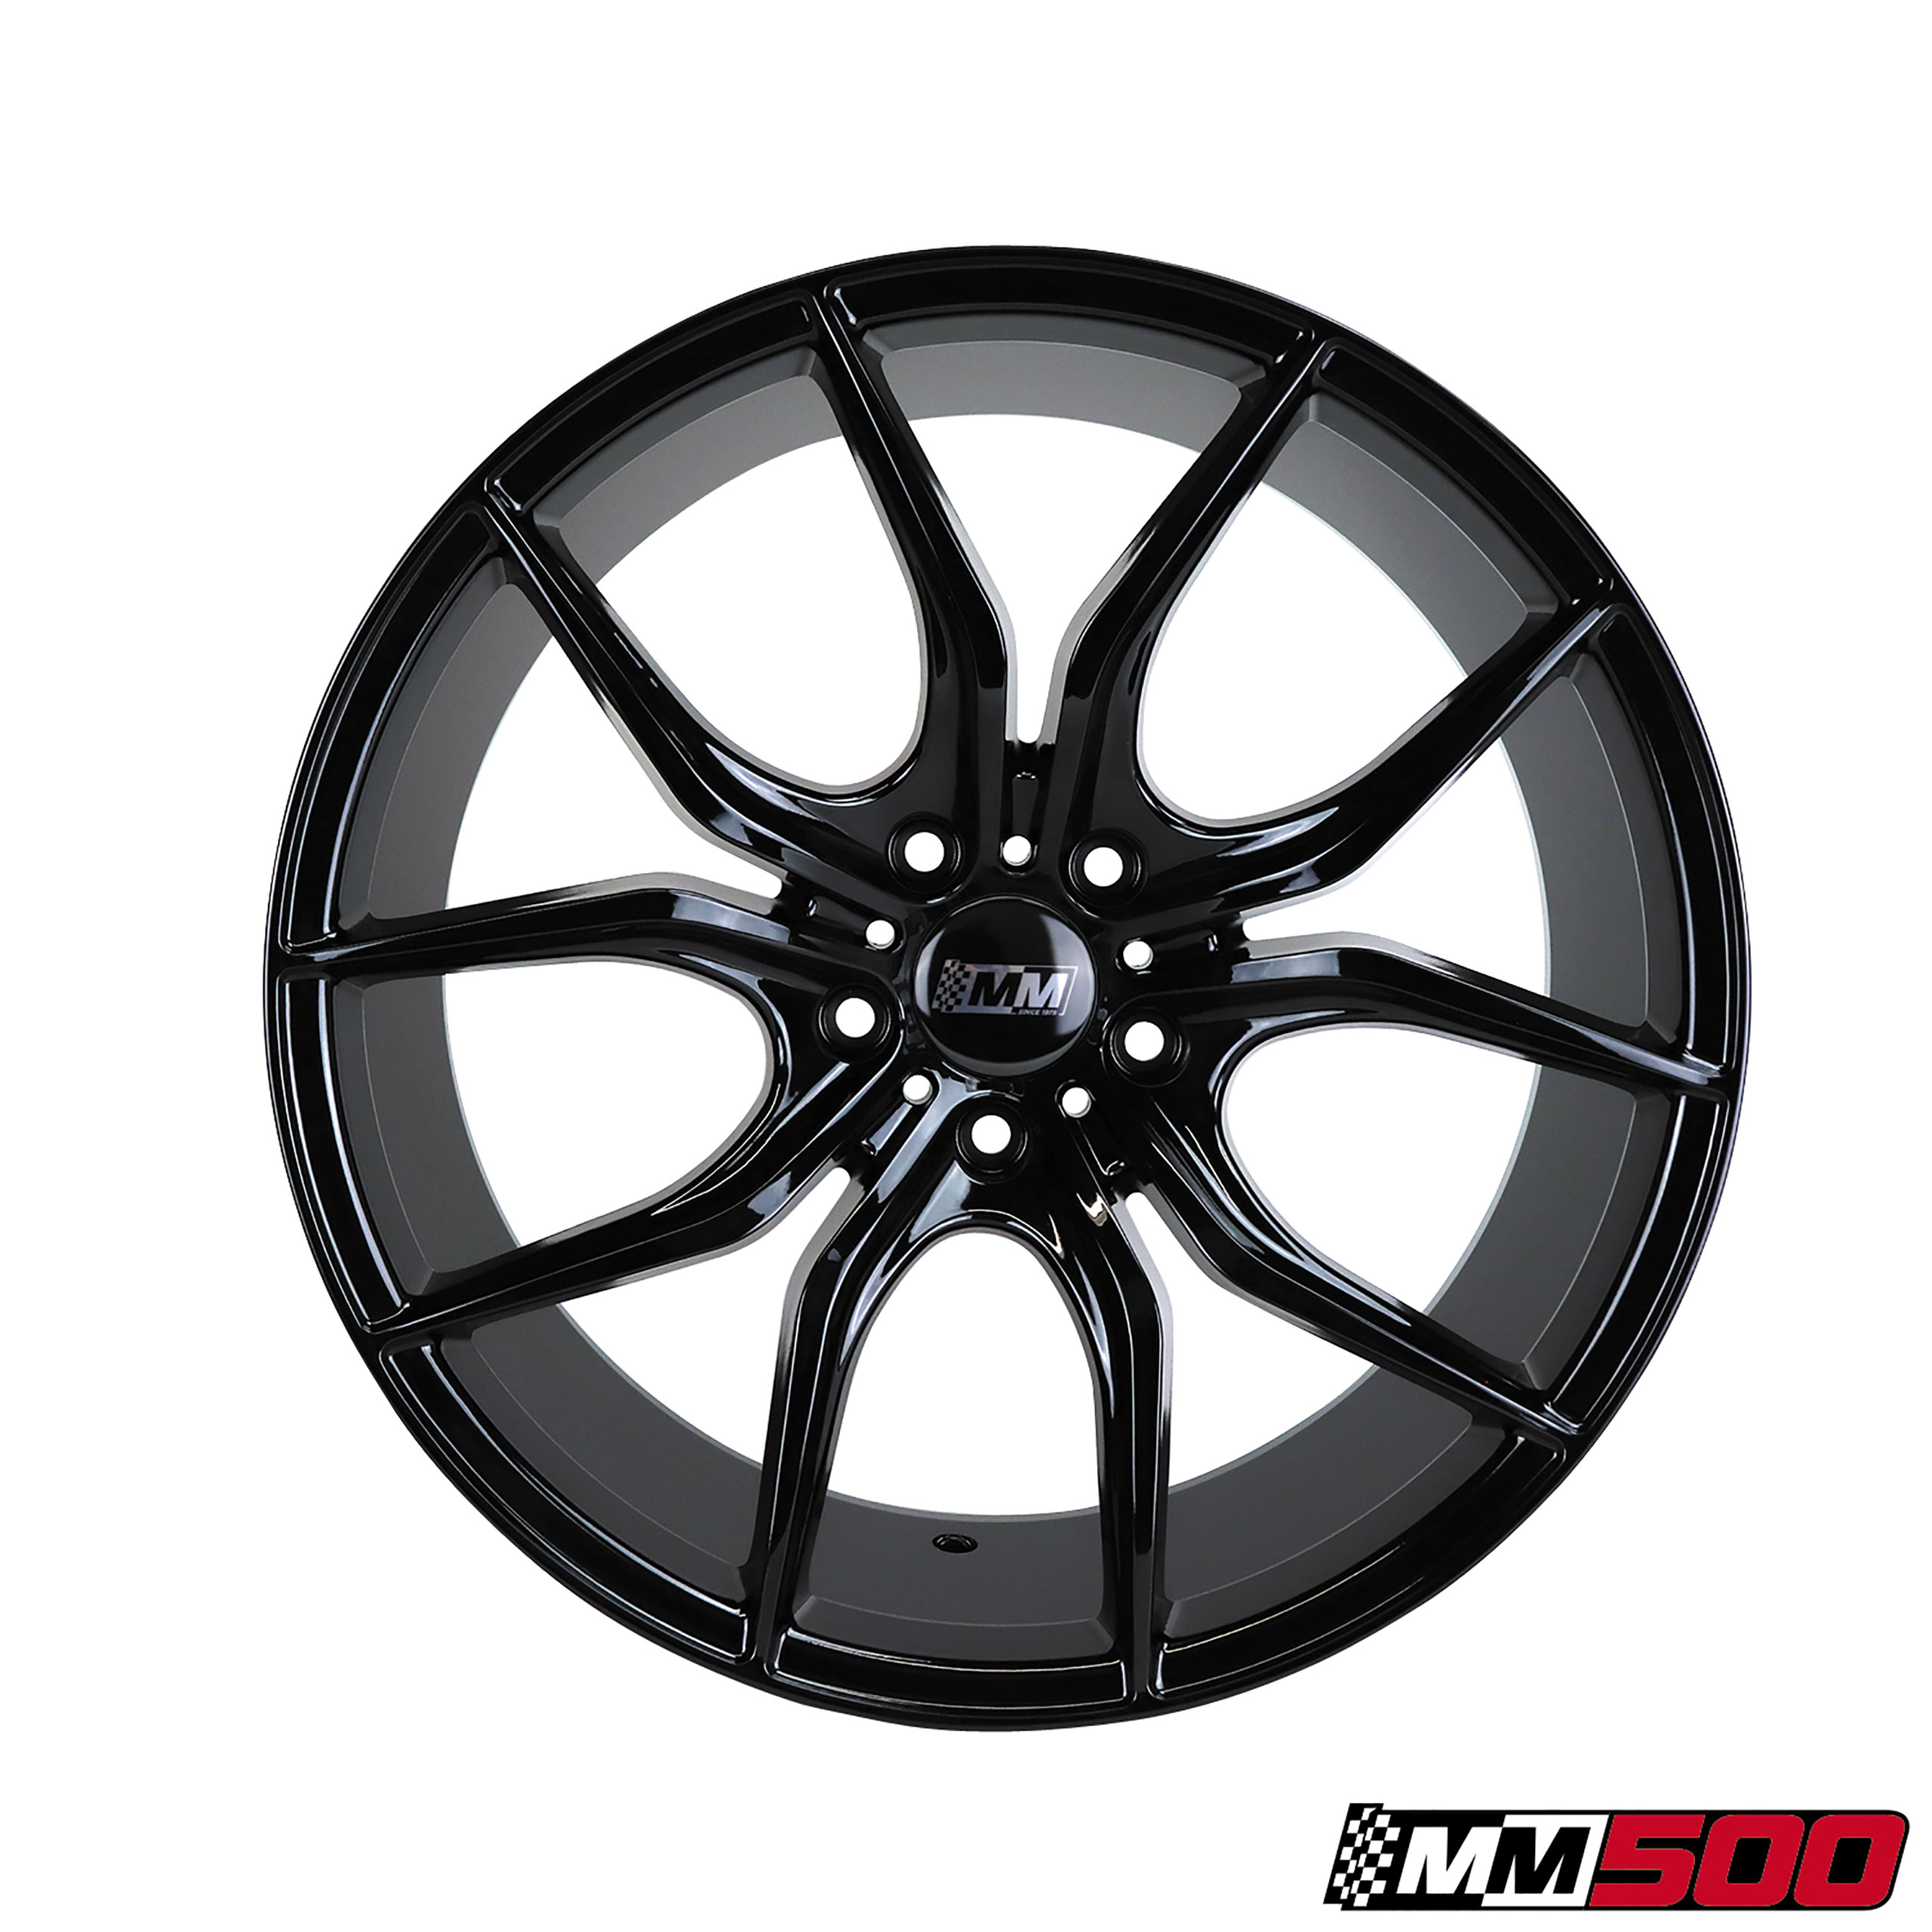 MM500 19x95 Wheel Gloss Black Rear Only For 2005-2014 Mustang